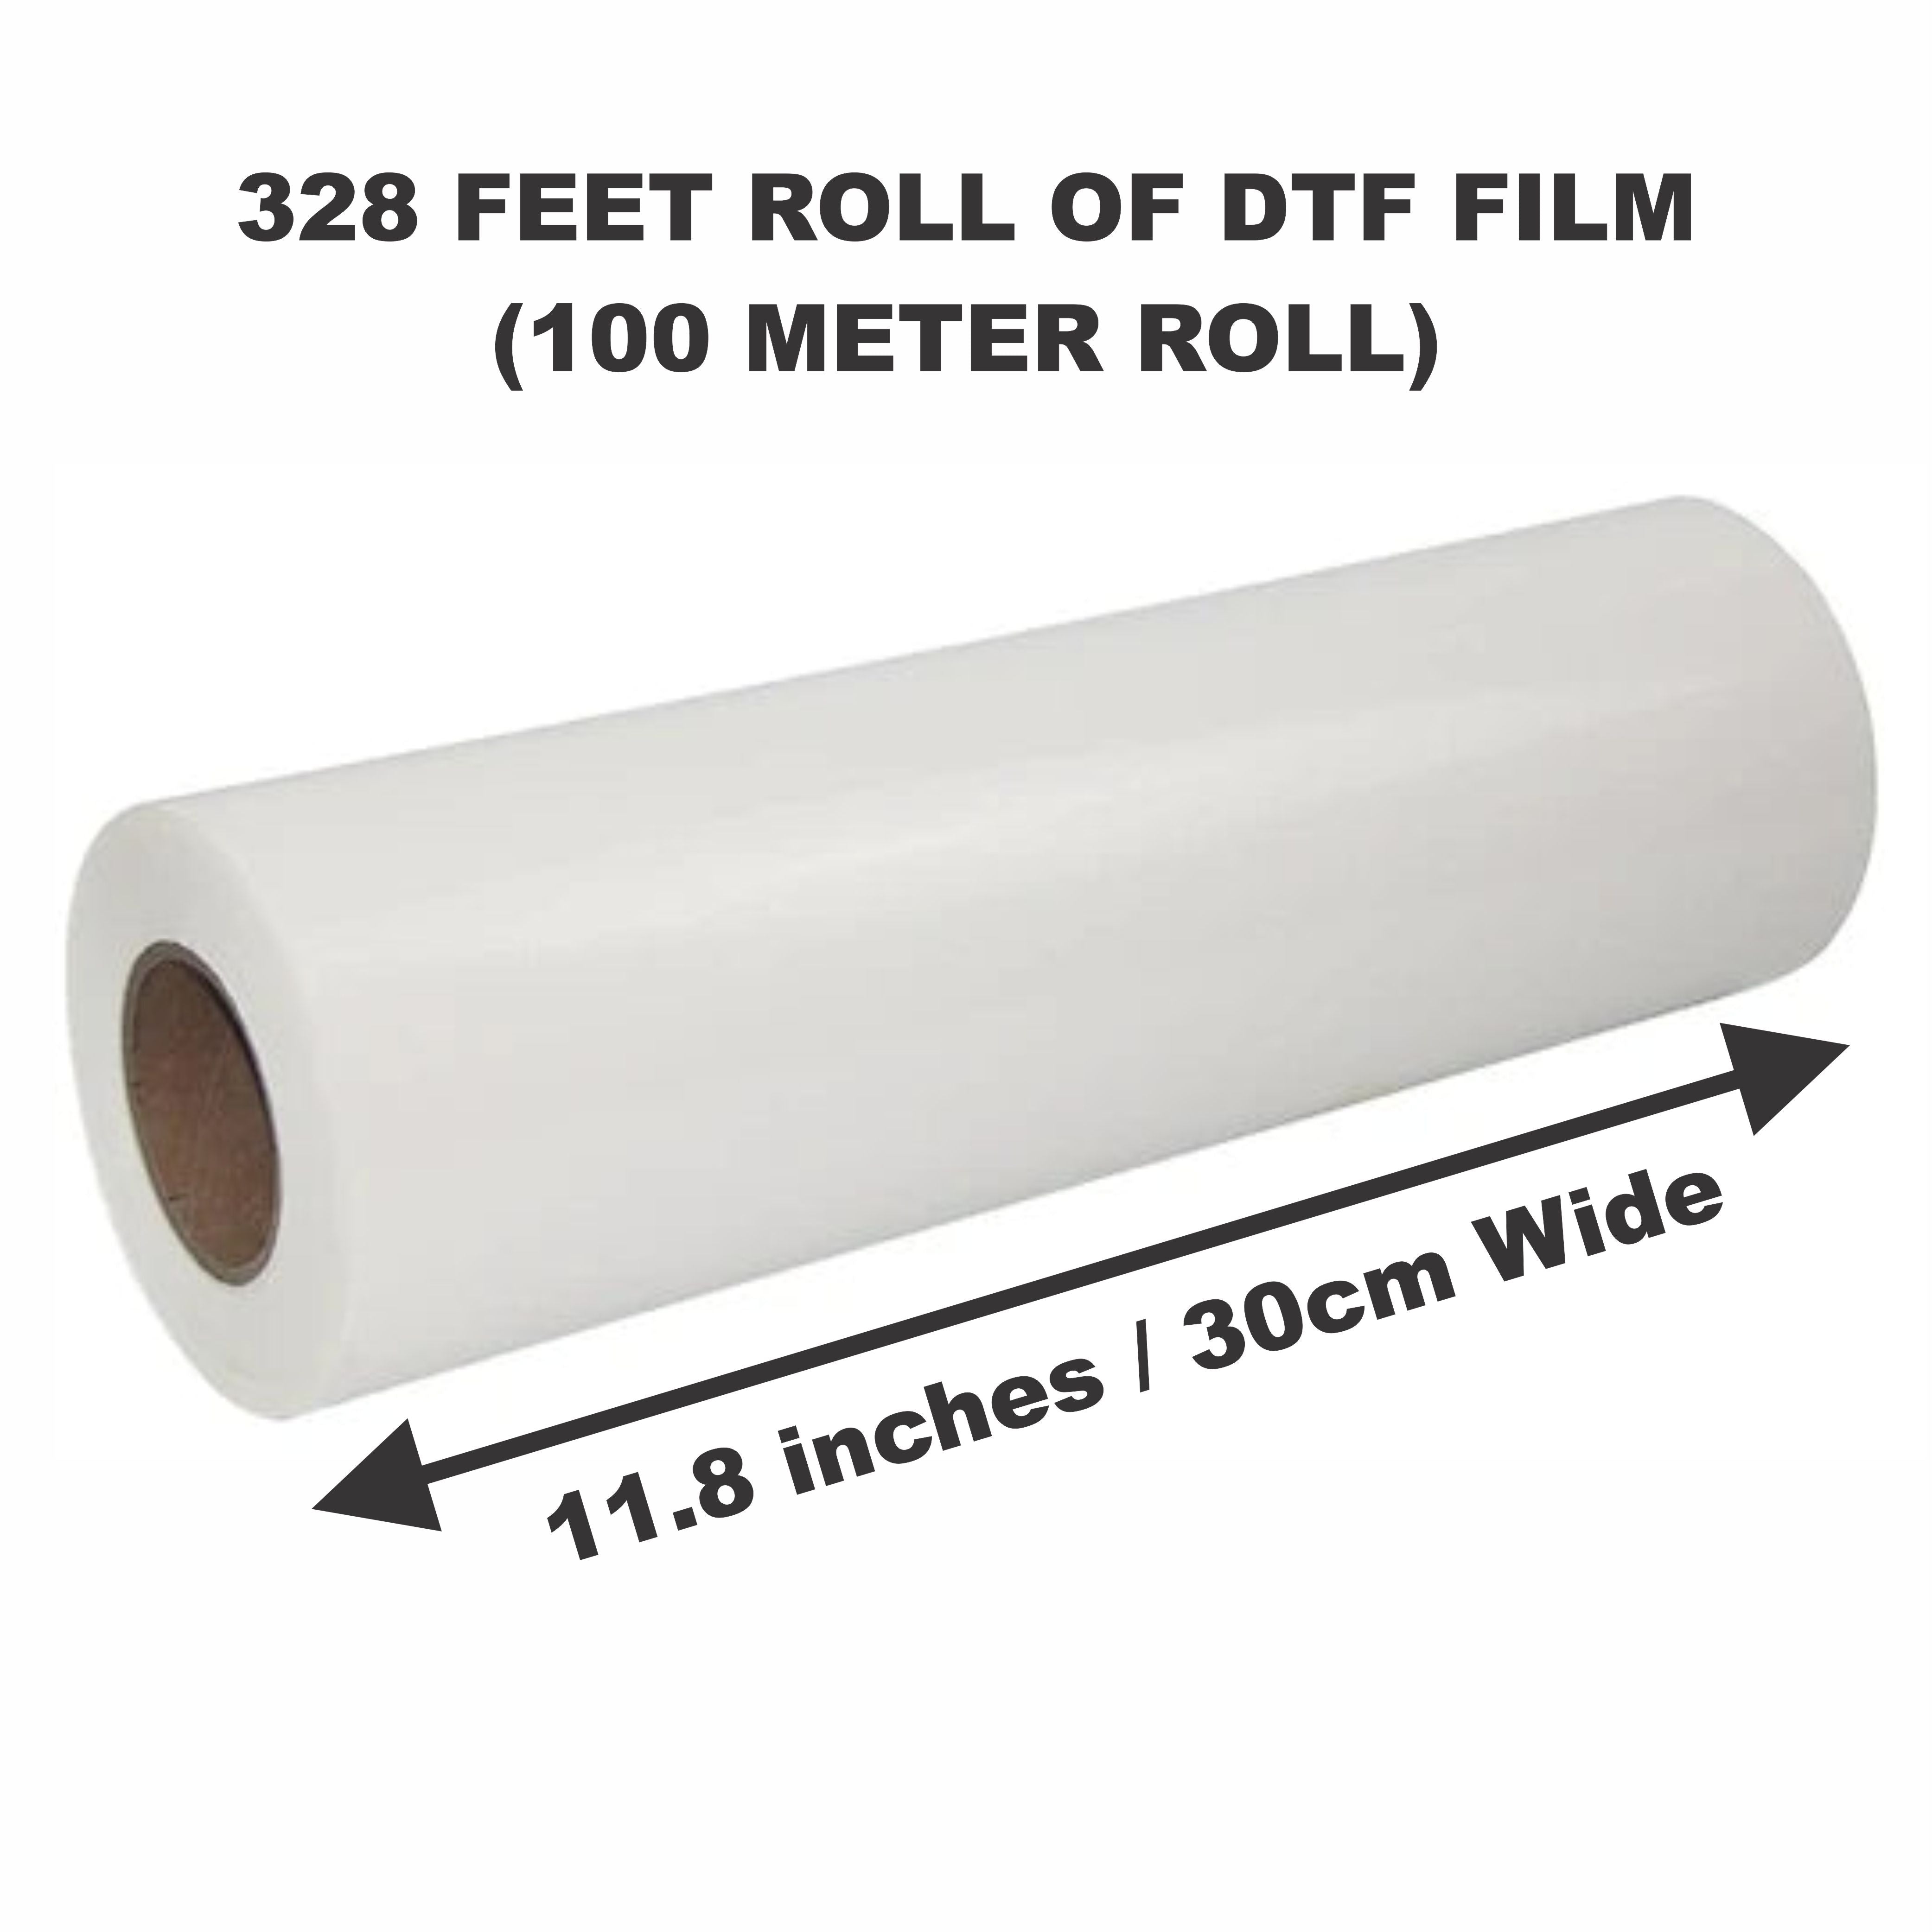 11.8” x 328 Feet Roll Of DTF Film - Double Sided Cold/Warm Peel